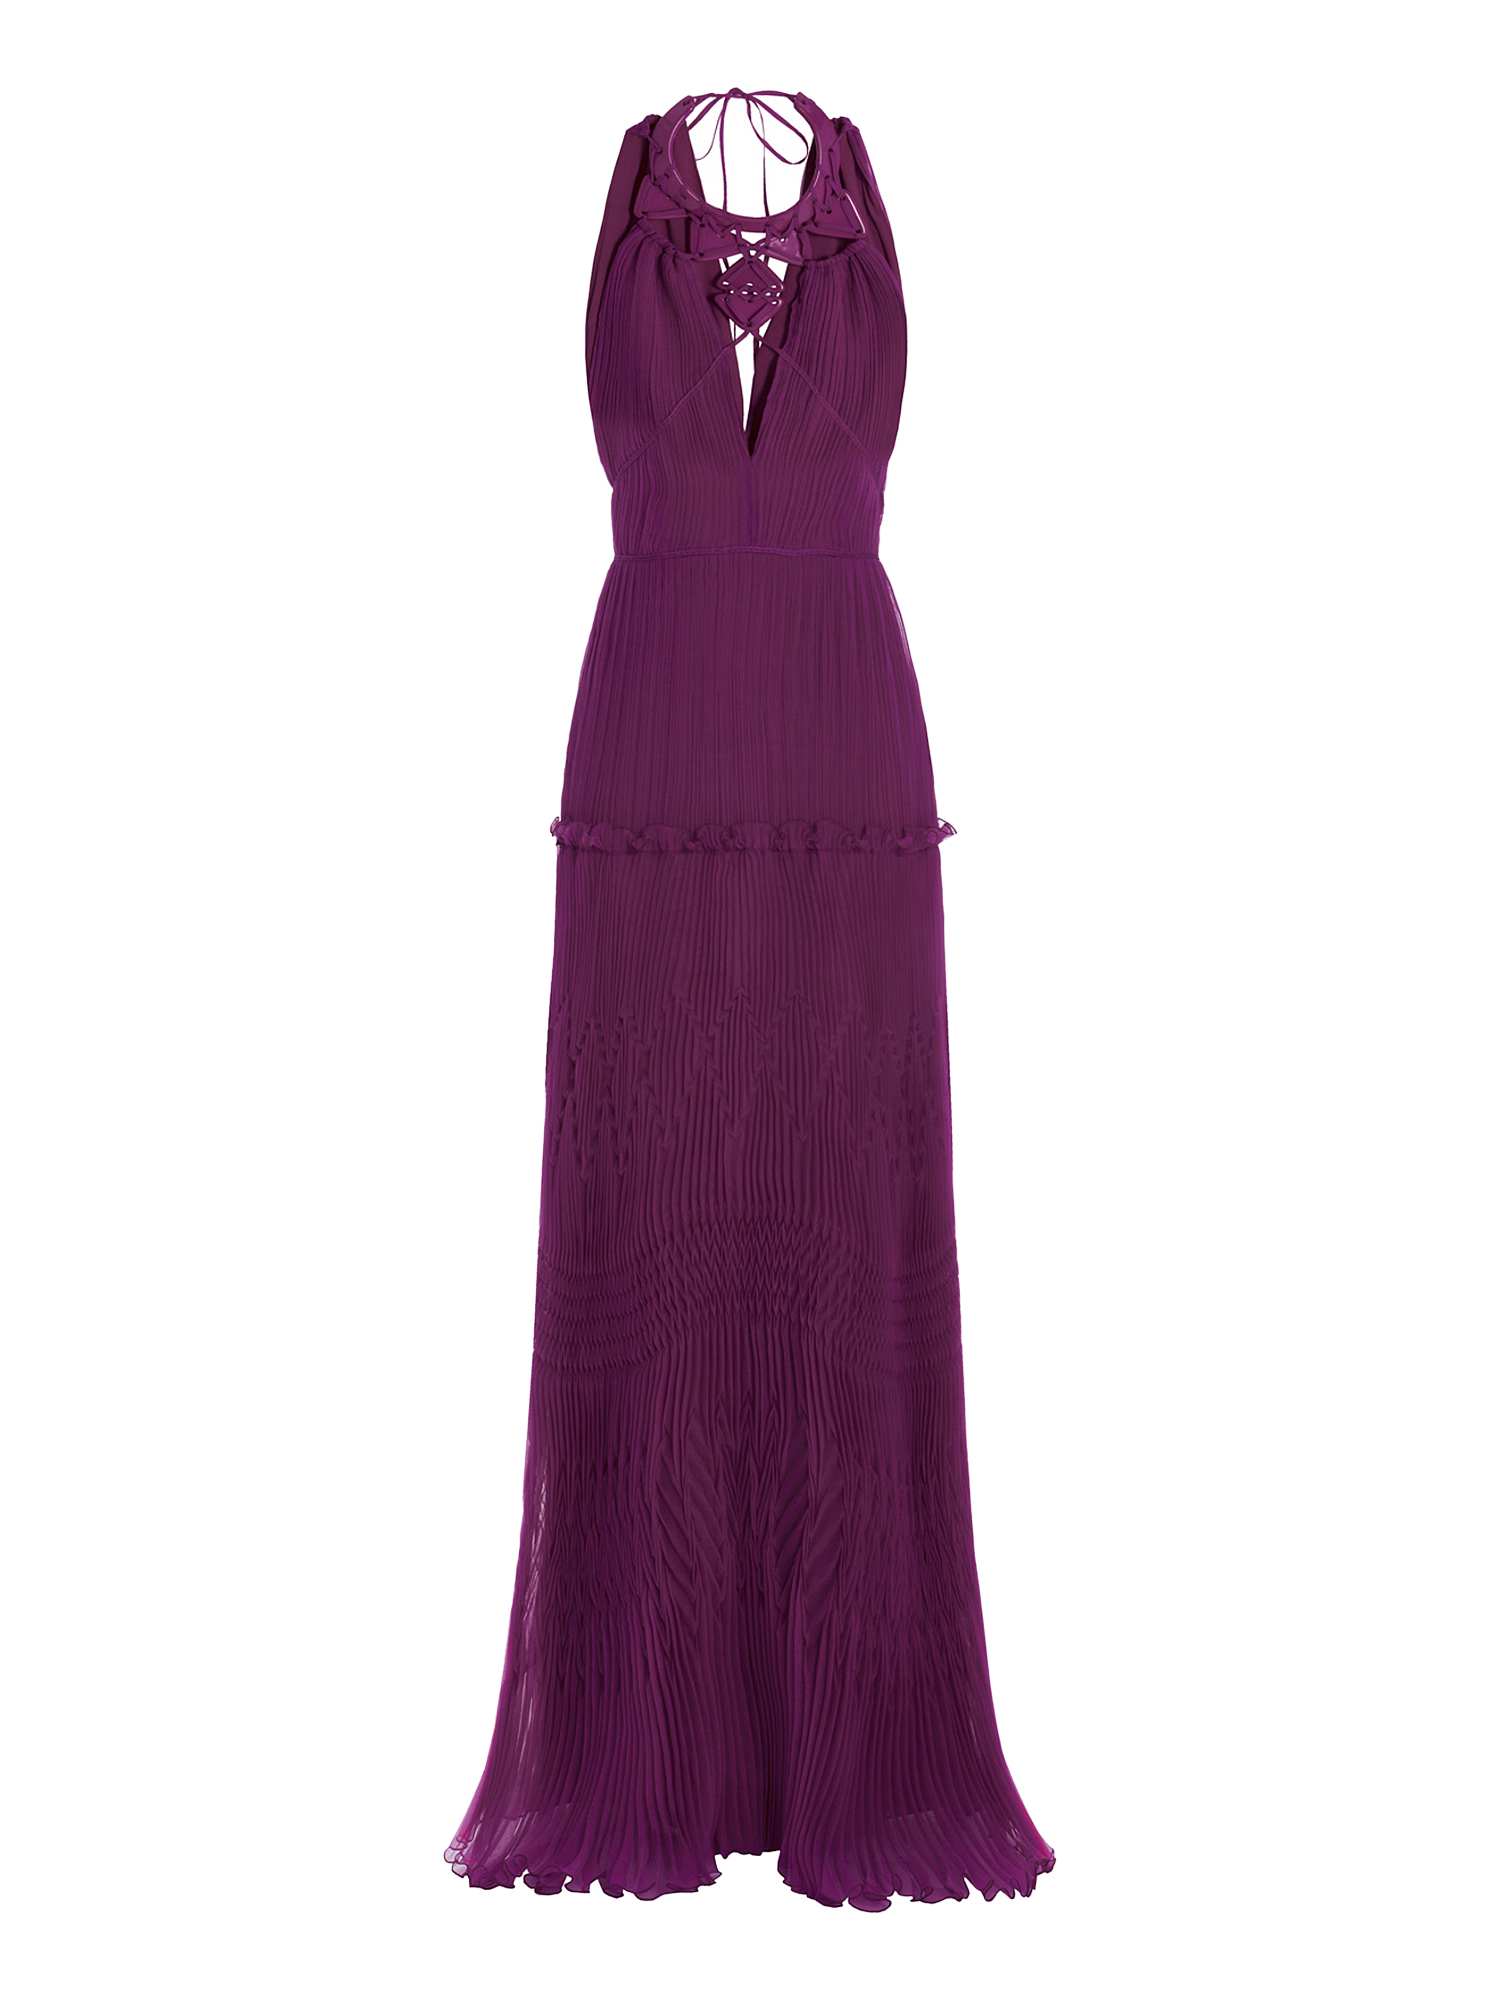 Condition: New With Tag,  Silk, Color: Purple - M - IT 42 -